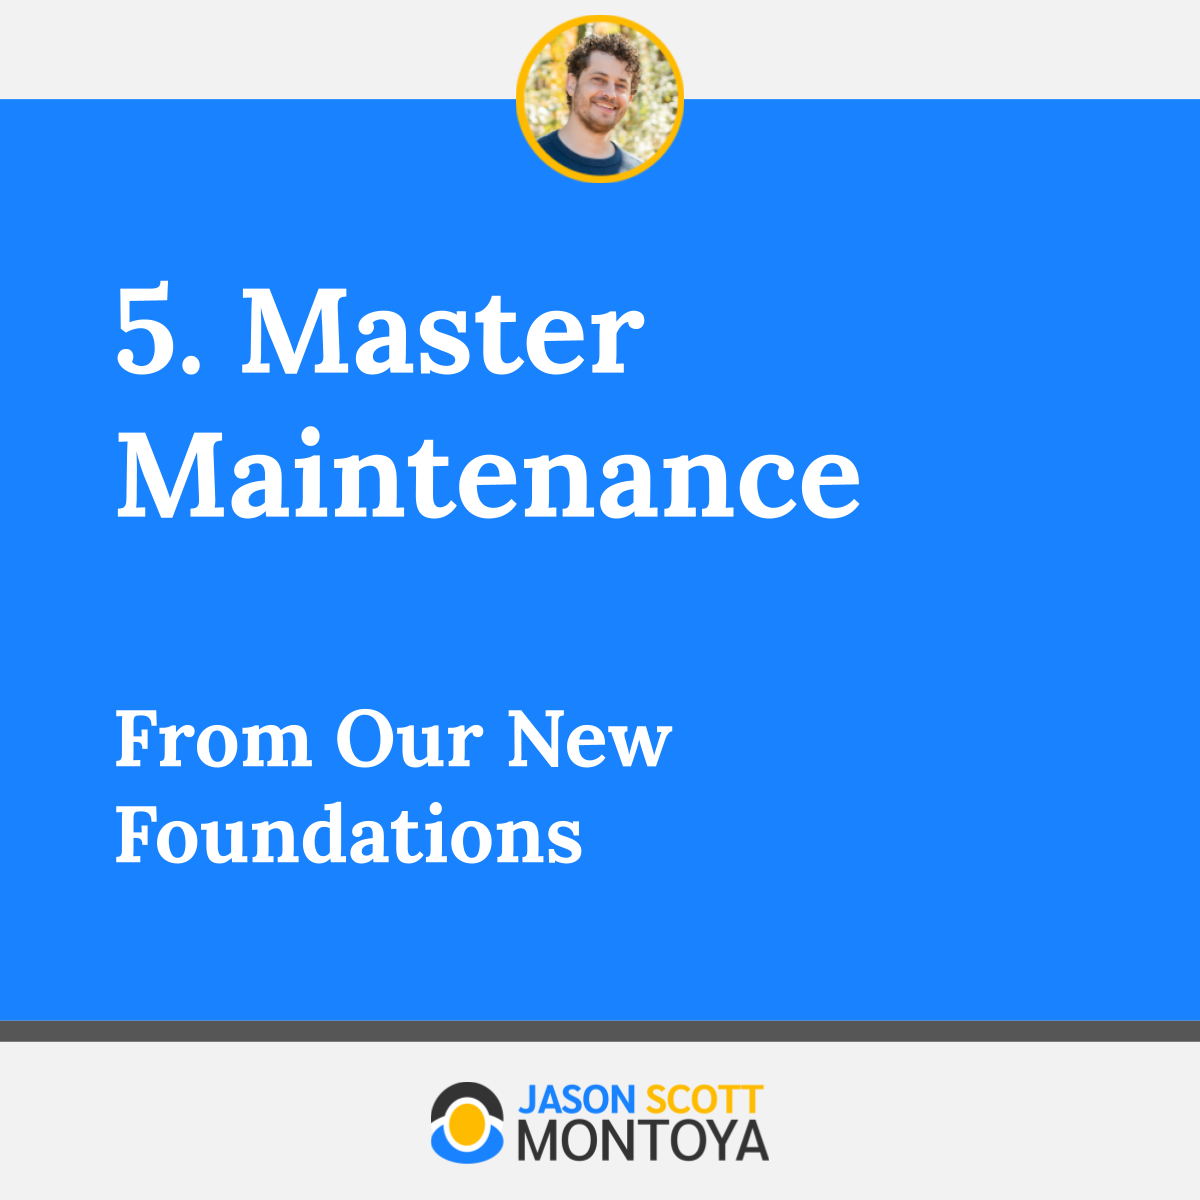 5. Master Maintenance From Our New Foundations